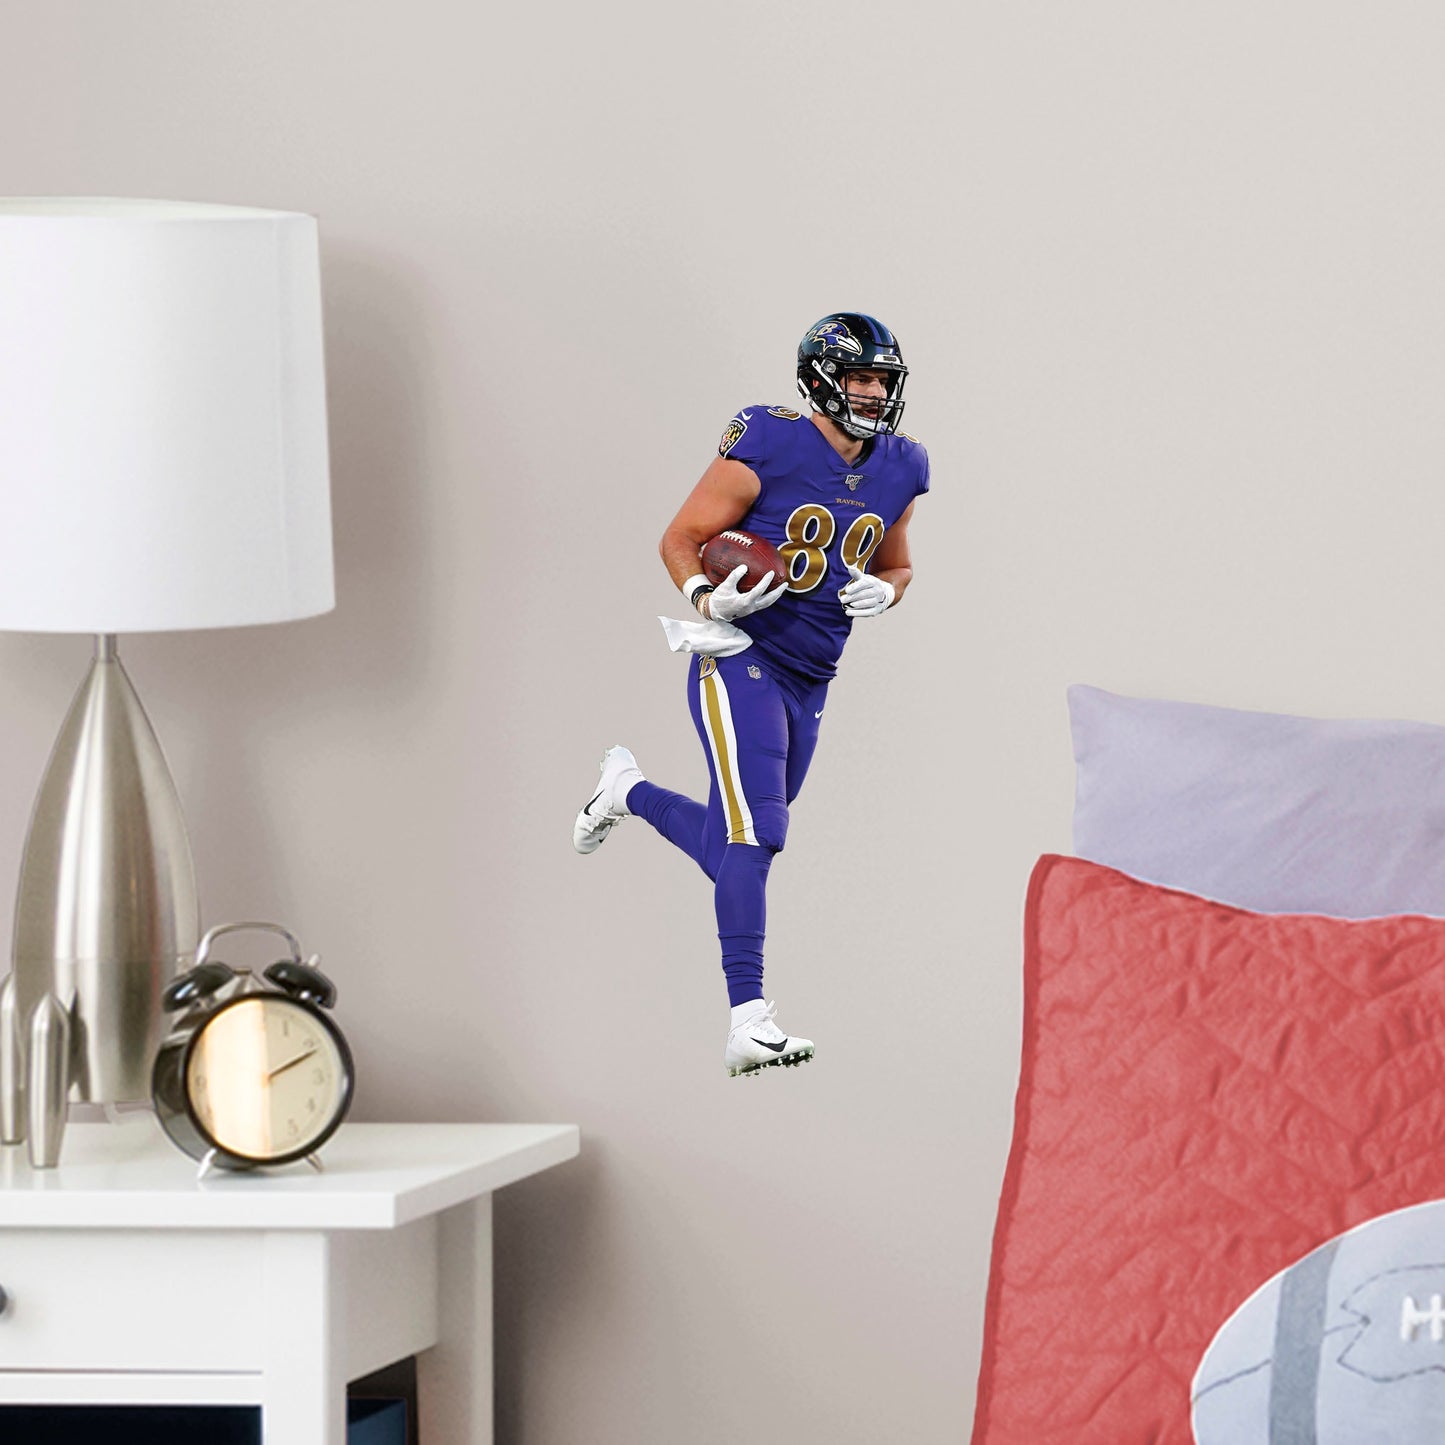 Large Athlete + 2 Decals (8"W x 17"H) Bring the action of the NFL into your home with a wall decal of Mark Andrews! High quality, durable, and tear resistant, you'll be able to stick and move it as many times as you want to create the ultimate football experience in any room!